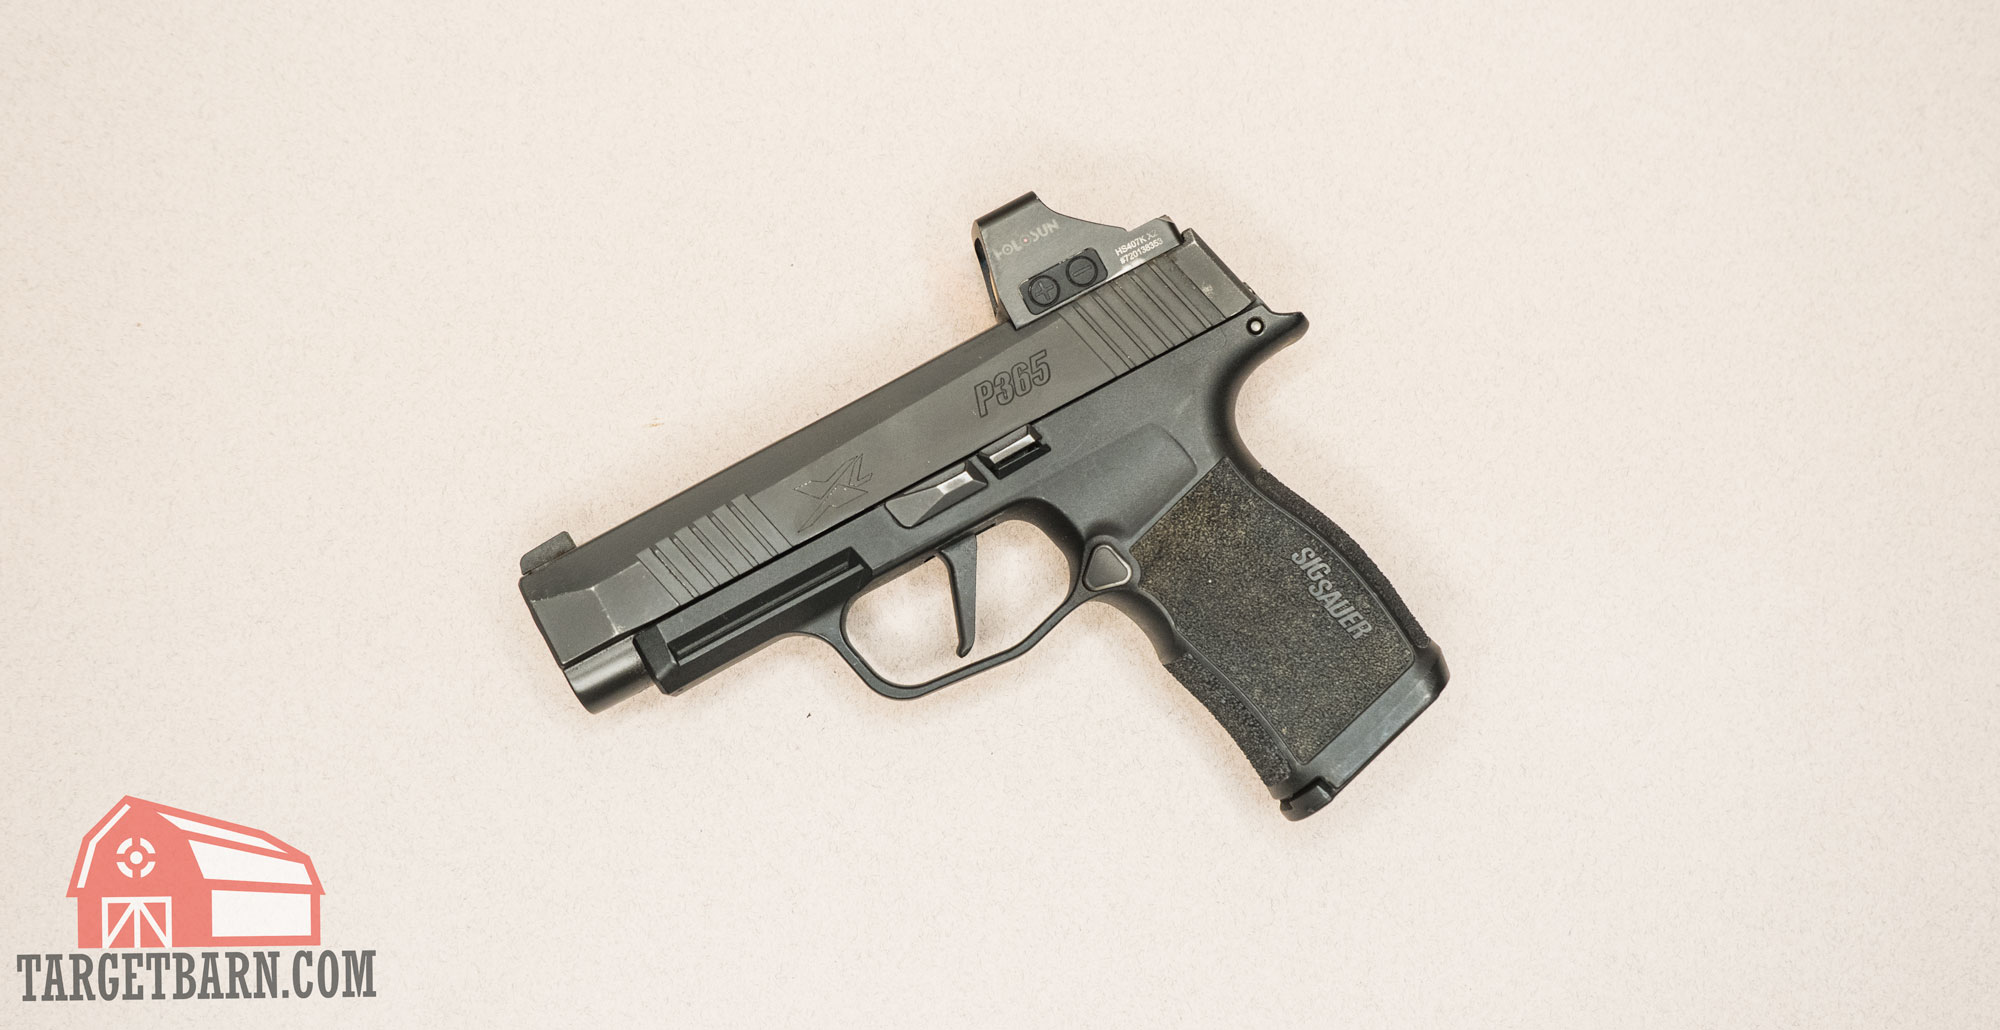 the sig sauer p365xl 9mm pistol with a holosun optic mounted on it